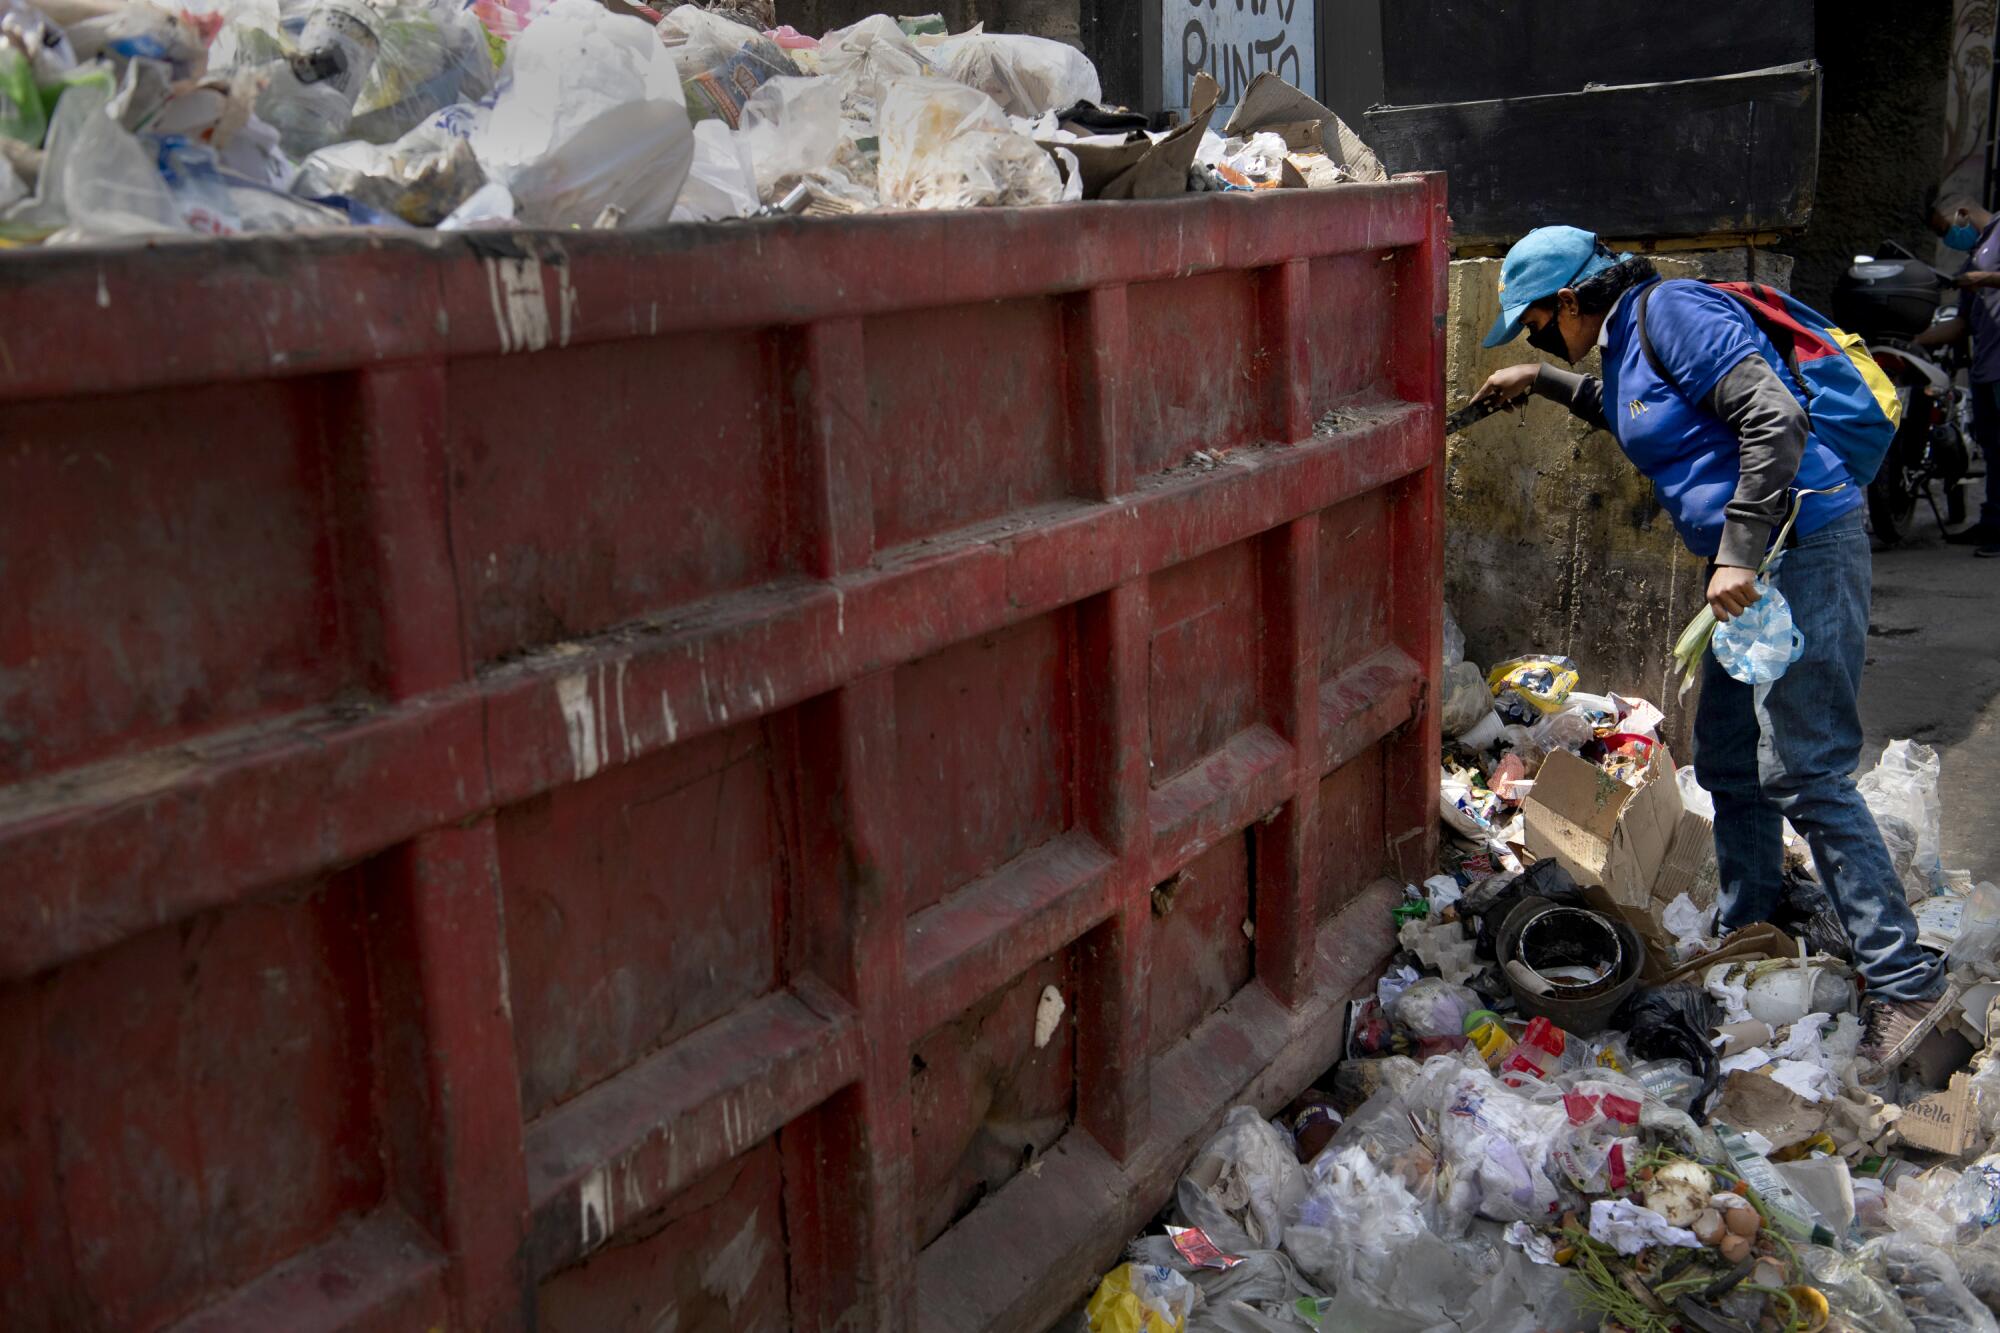 A person digs into the garbage for food in Caracas, Venezuela. 